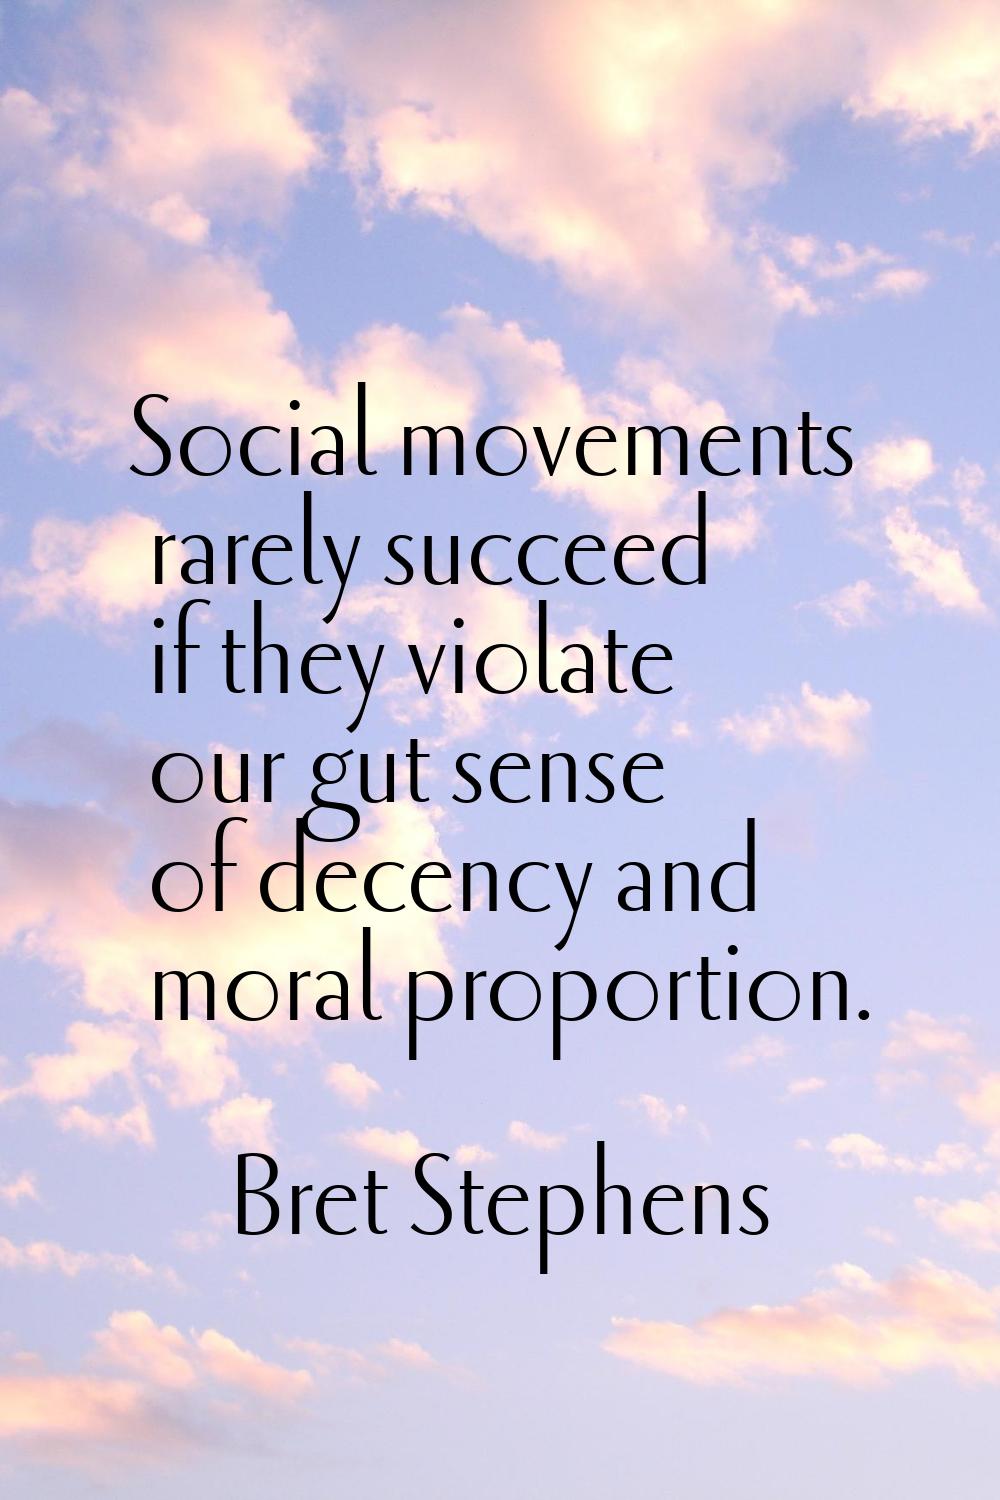 Social movements rarely succeed if they violate our gut sense of decency and moral proportion.